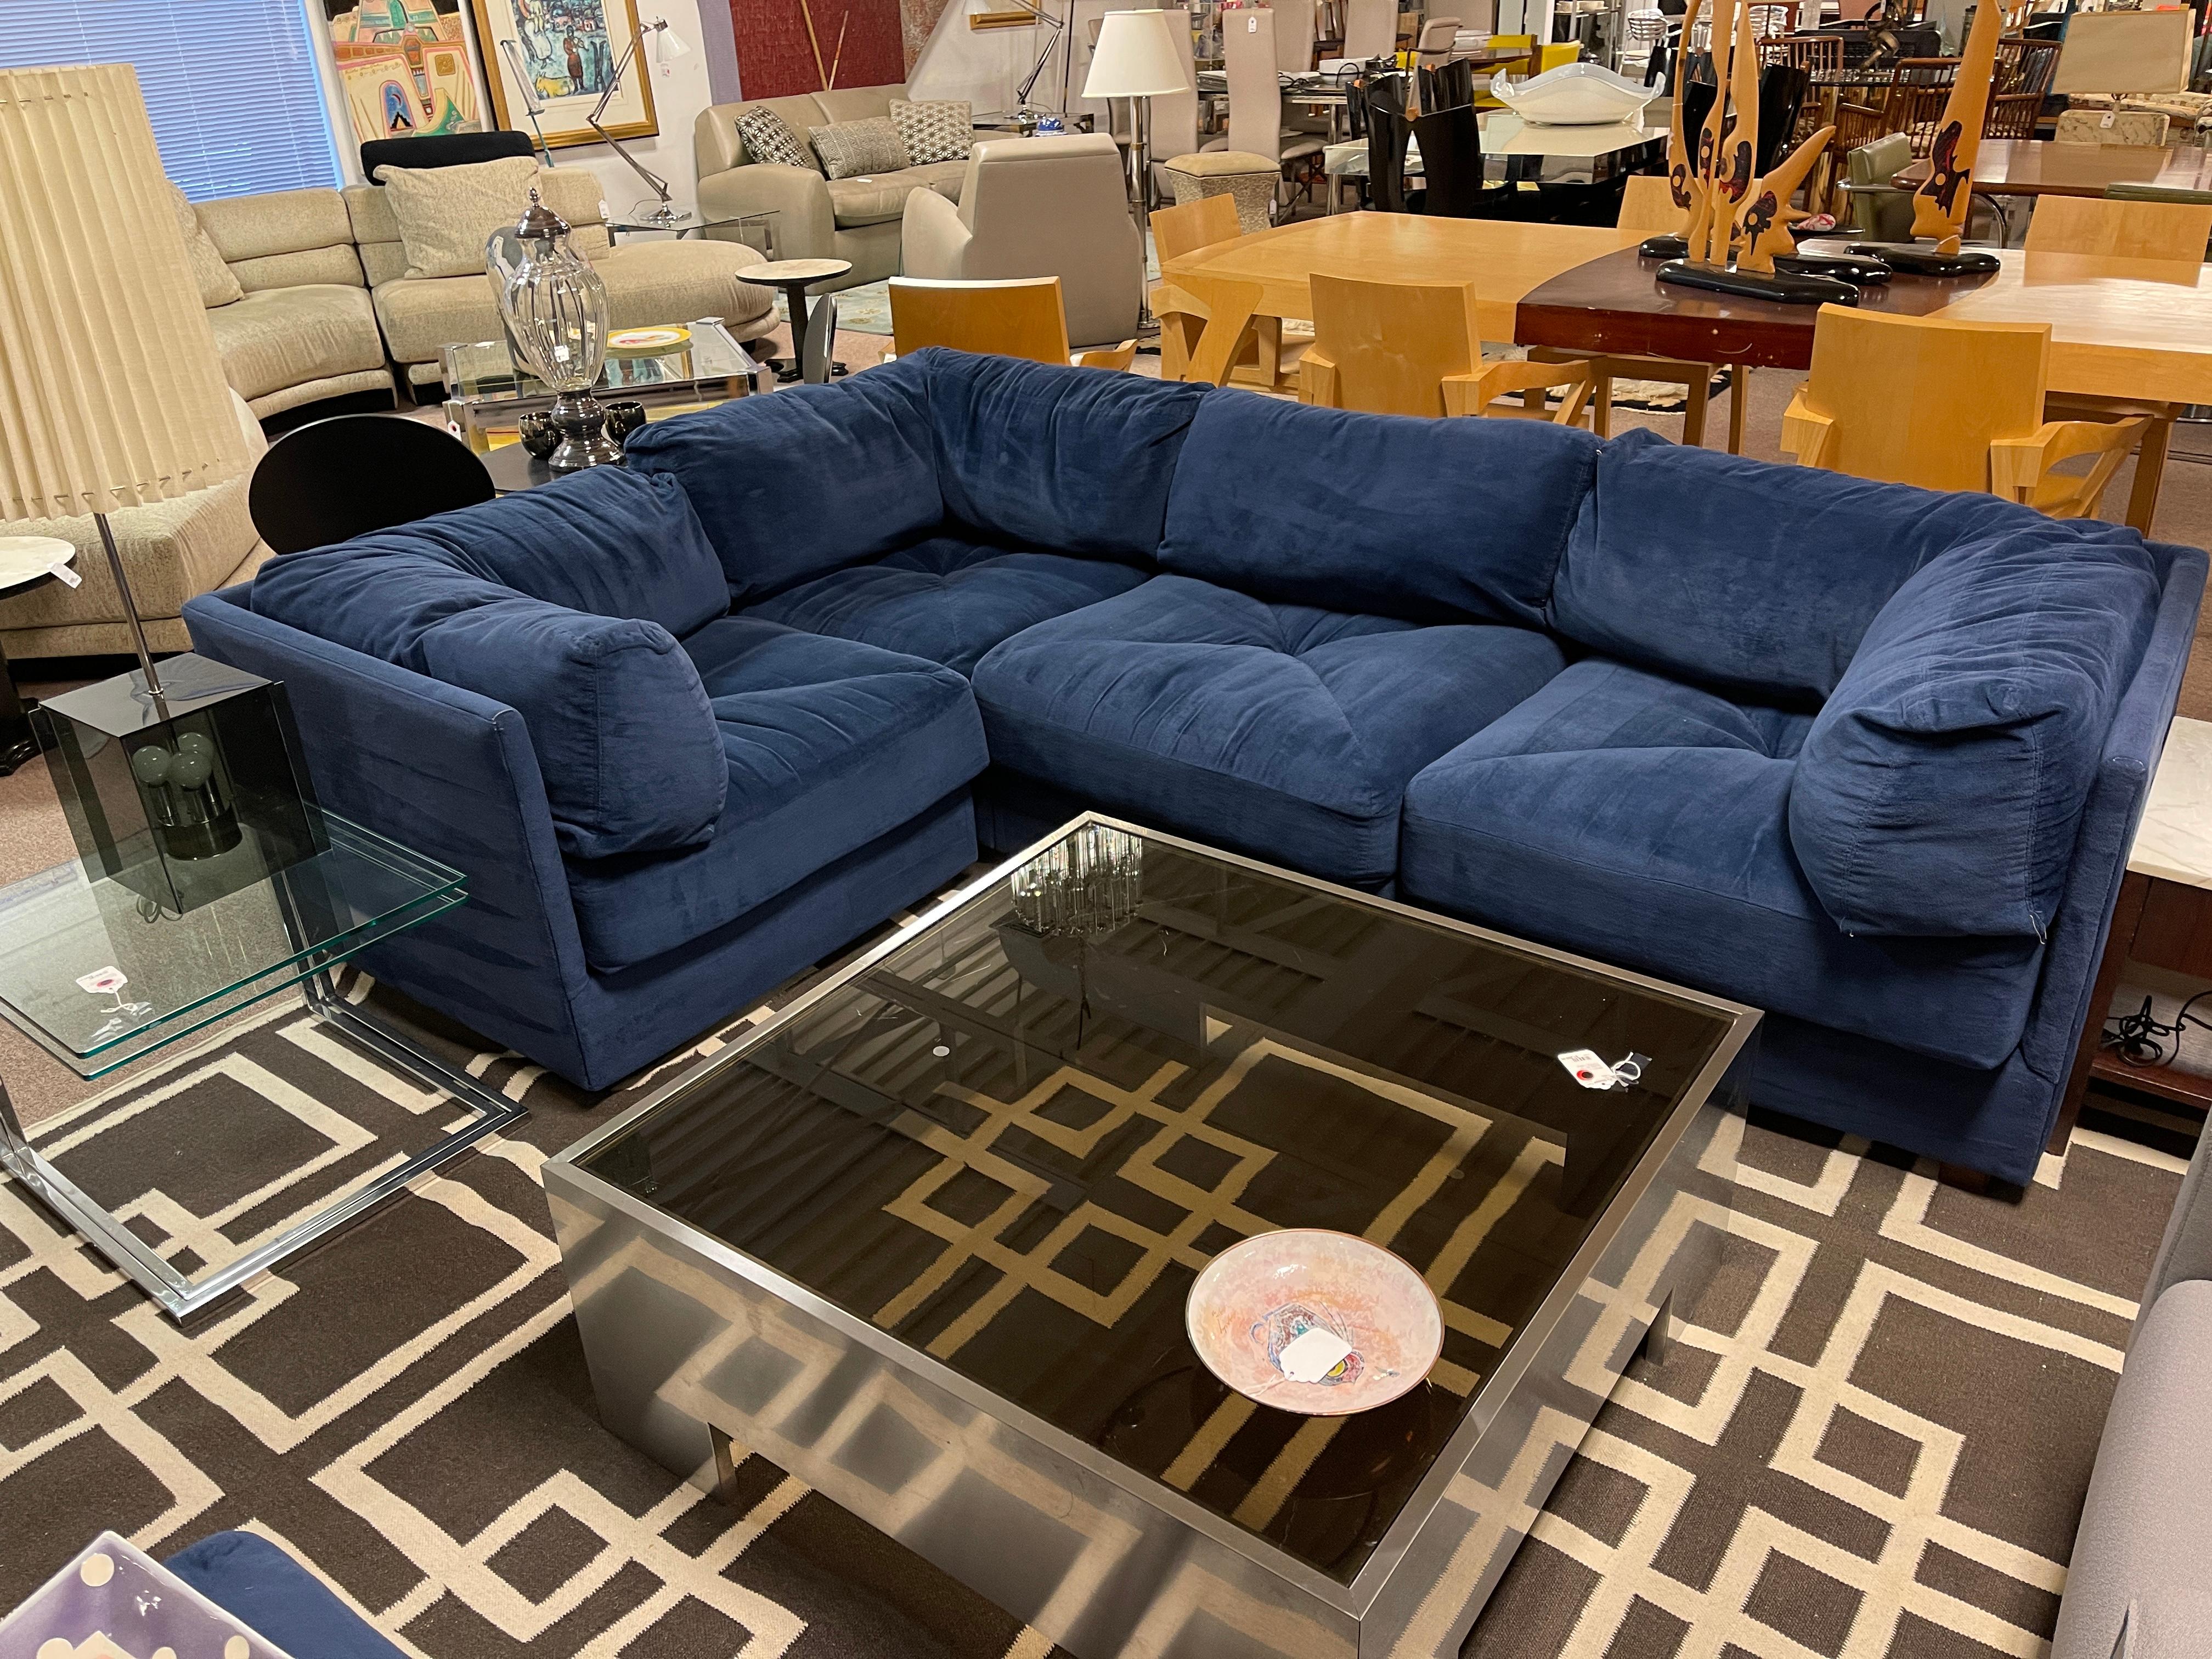 For your consideration is a modular, four piece sectional sofa, with an ottoman, upholstered in rich, blue velvet, by Milo Baughman, circa 1980s. In excellent vintage condition, color looks less vibrant in the pictures, the true color is royal blue.